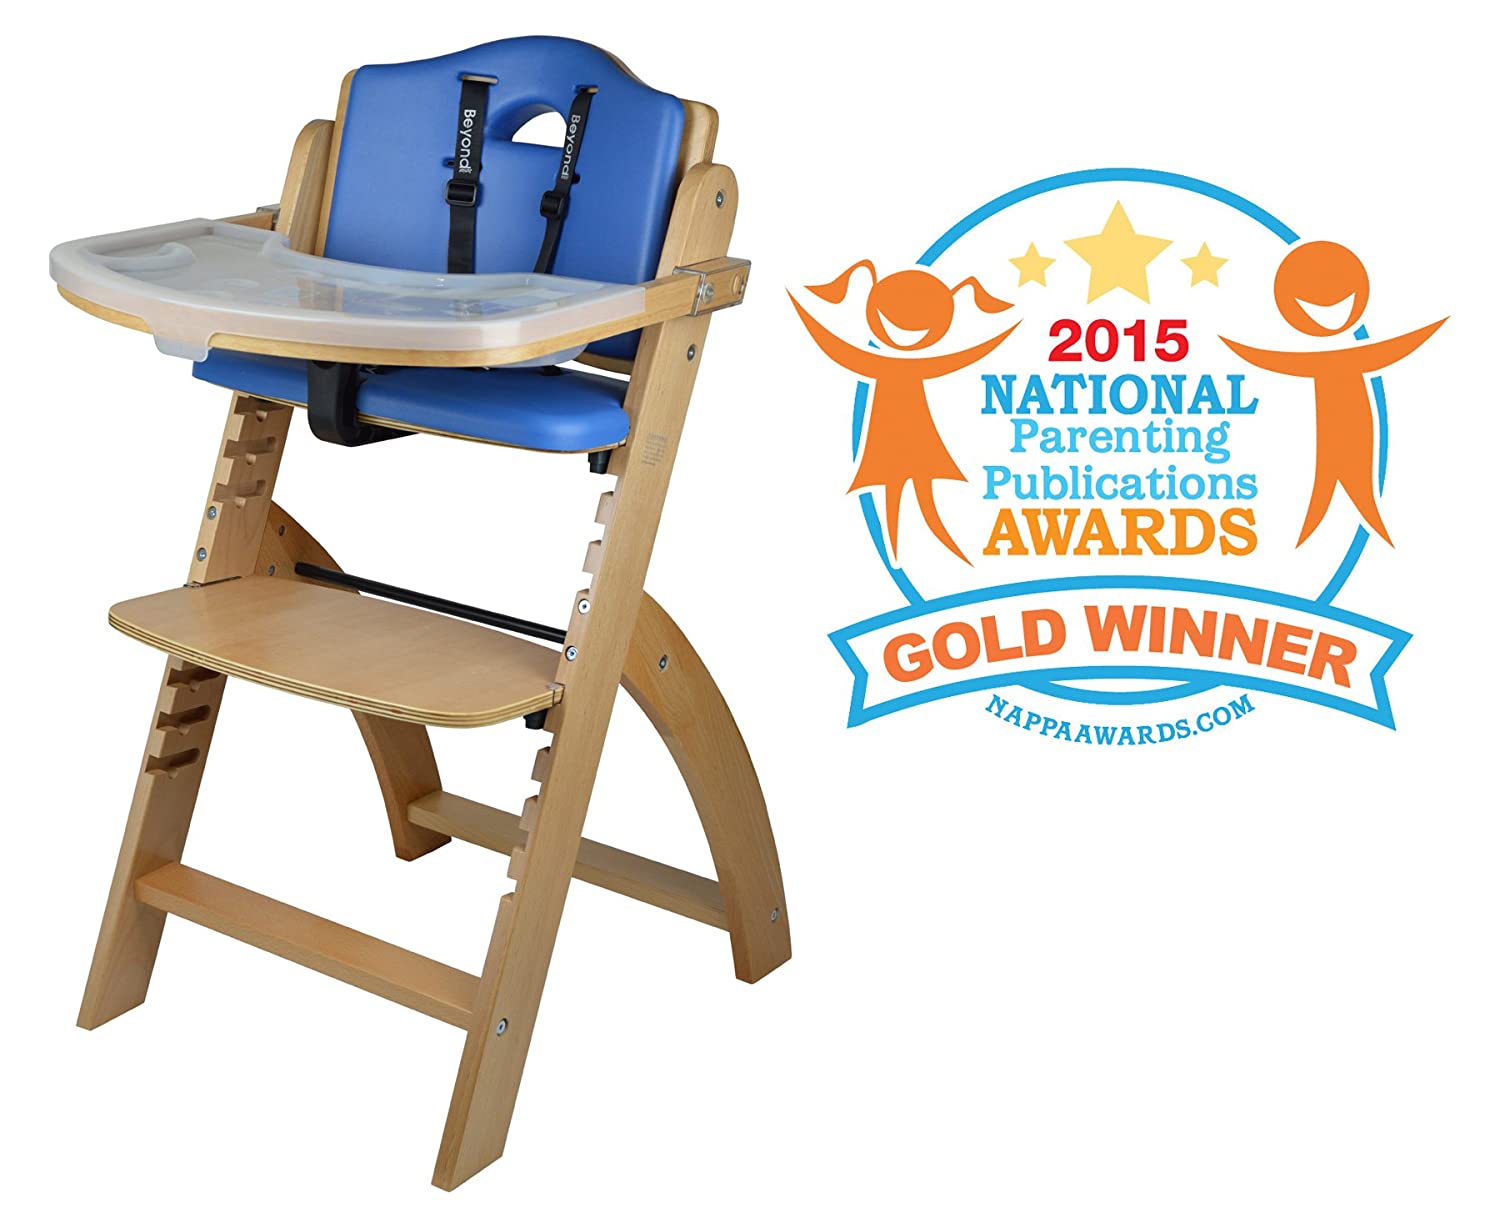 Abiie Beyond Wooden High Chair with Tray. The Perfect Adjustable Baby Highchair Solution (Natural Wood - Blue Cushion)